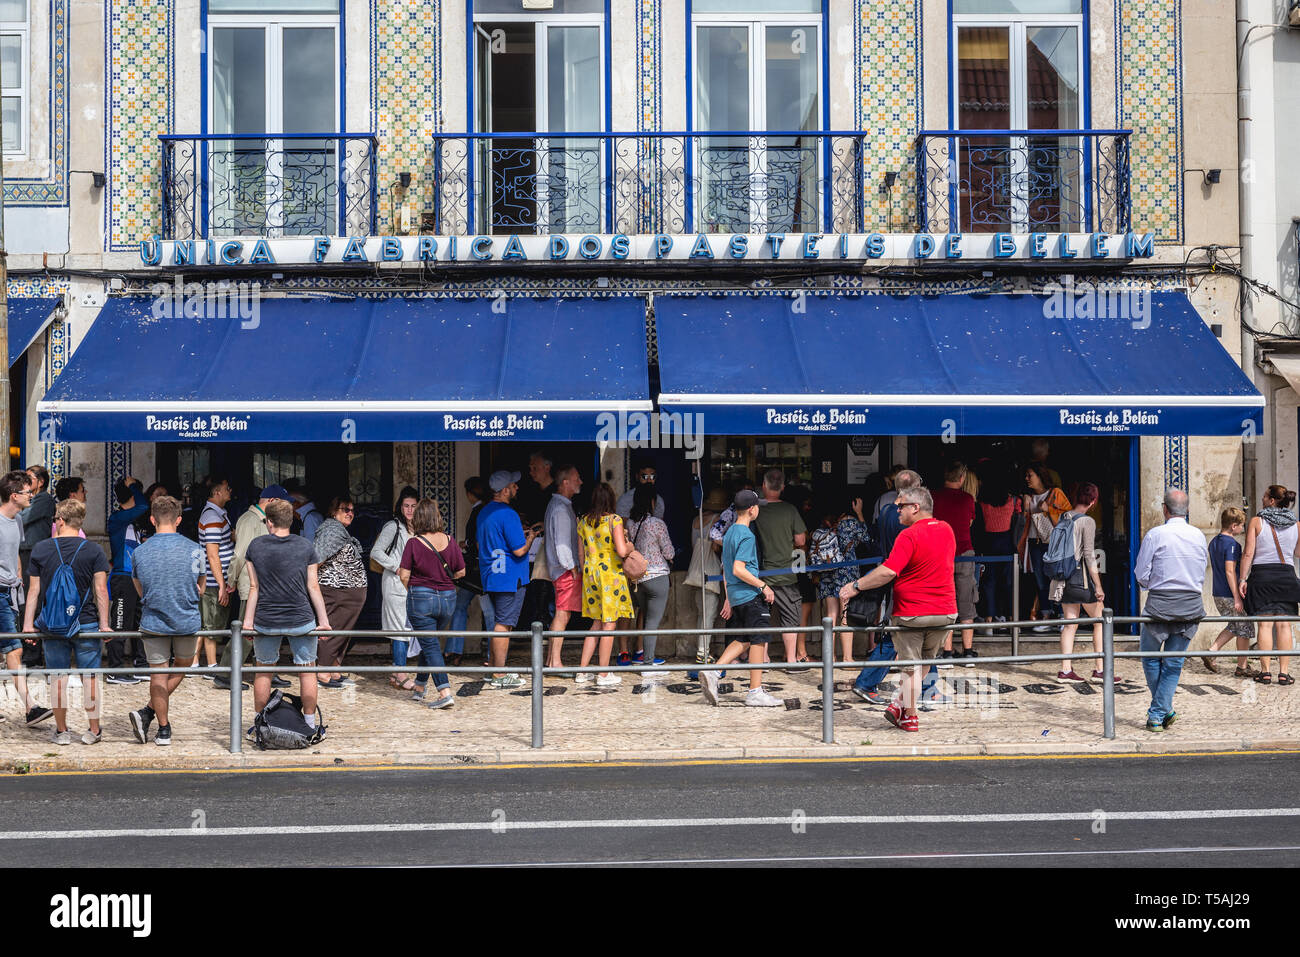 Queue in front of famous Pasteis de Belem pastry shop in Belem district of  Lisbon, Portugal Stock Photo - Alamy